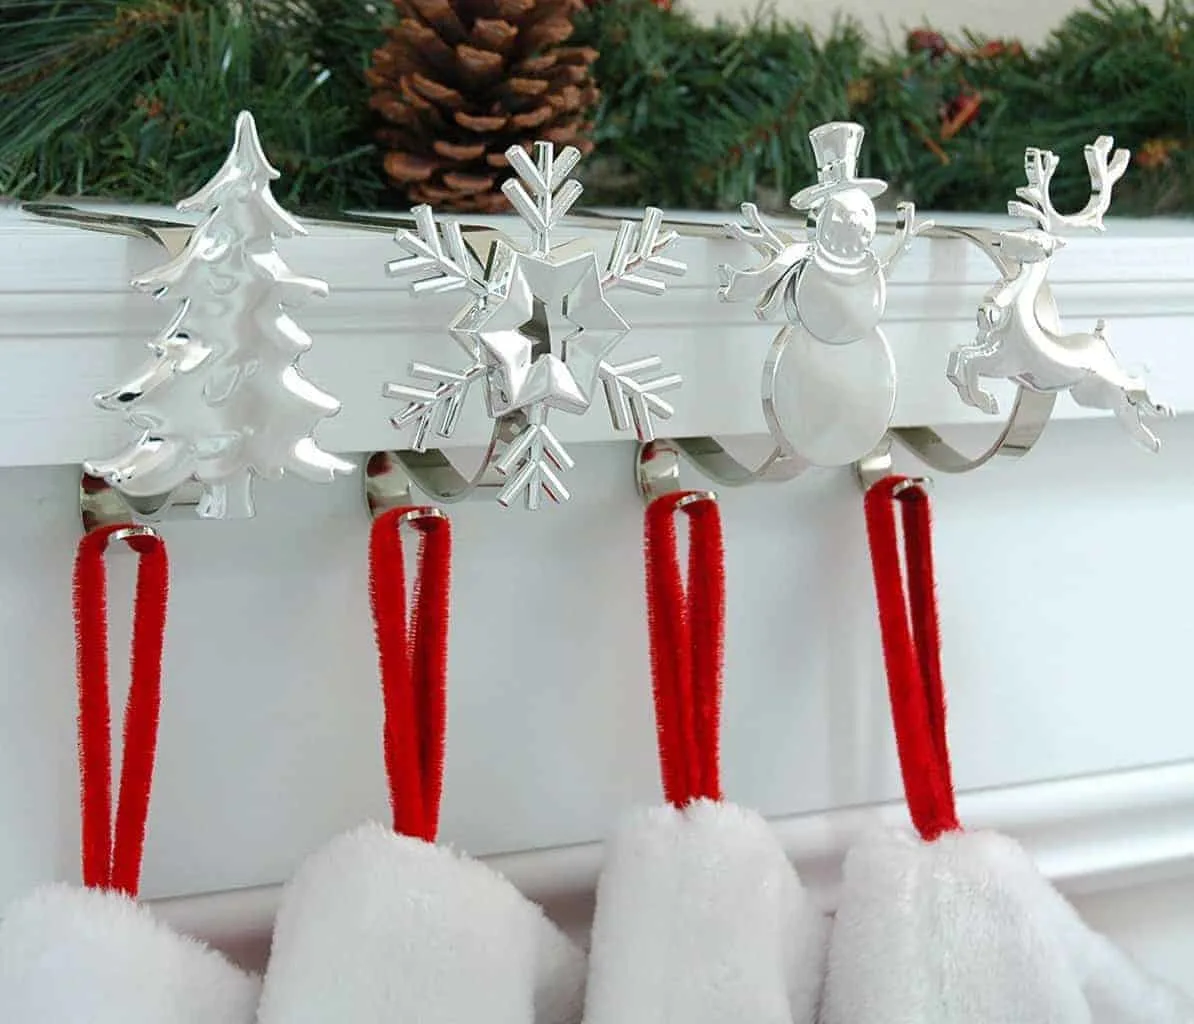 Classy (and affordable!) DIY Stocking Hanger - Maison de Pax